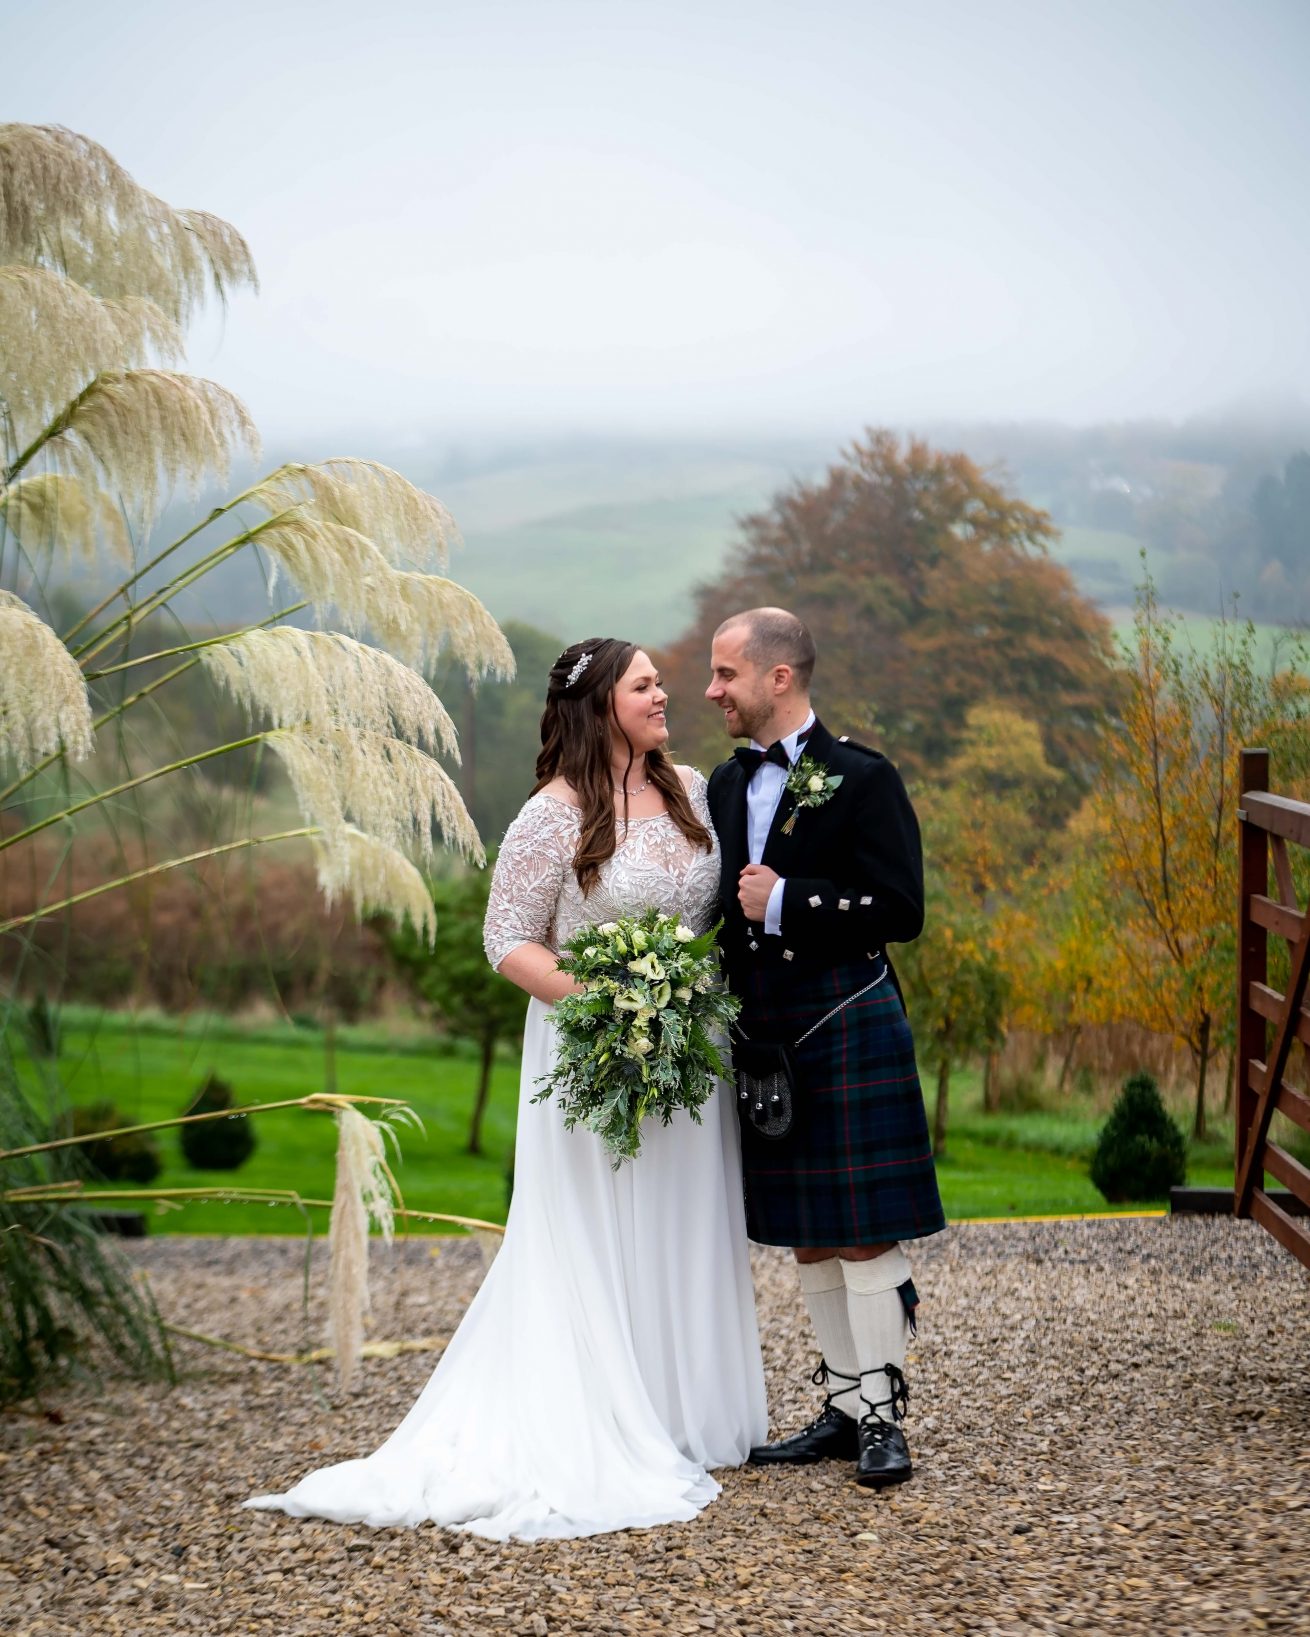 Thomas and Eleanor's Wedding at South Causey Inn